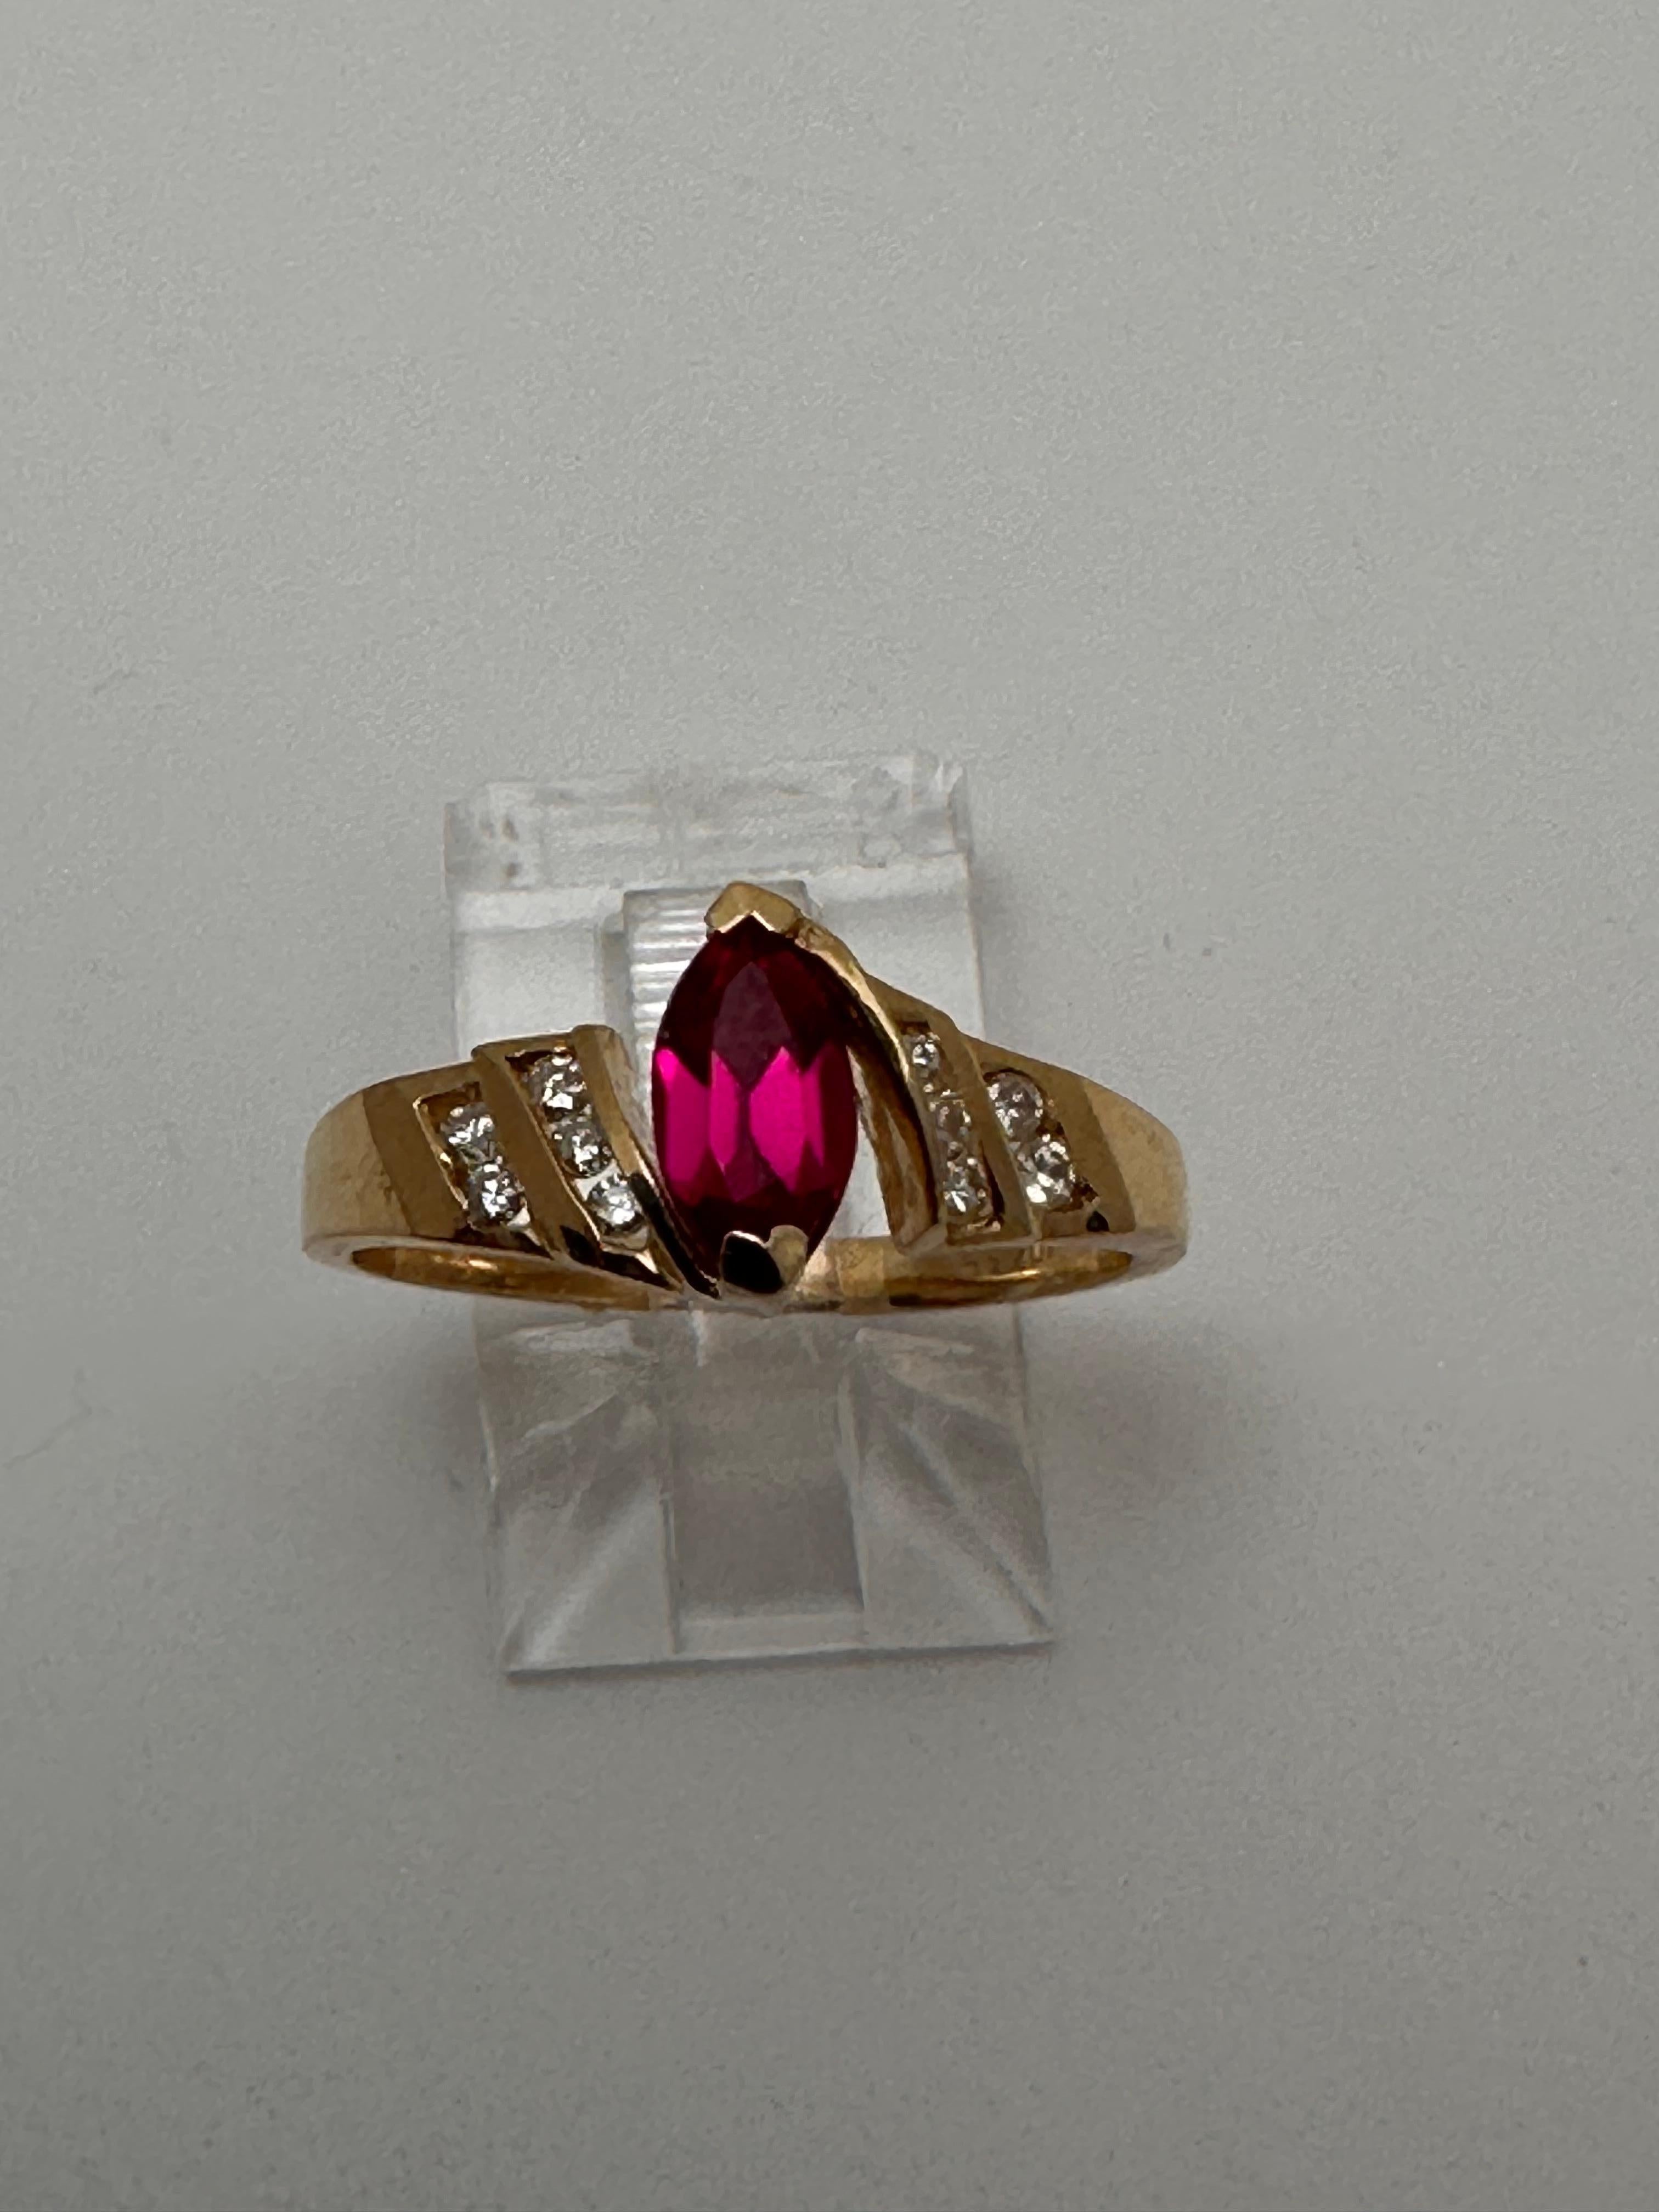 10k Yellow Gold approx. 4 x 8mm Marquise Ruby with 5 Channel Set Diamonds on each side of the ring ~ total 10 round diamonds.
Size 7

The ruby is known as a protective stone that can bring happiness and passion into the life of the wearer. Apart